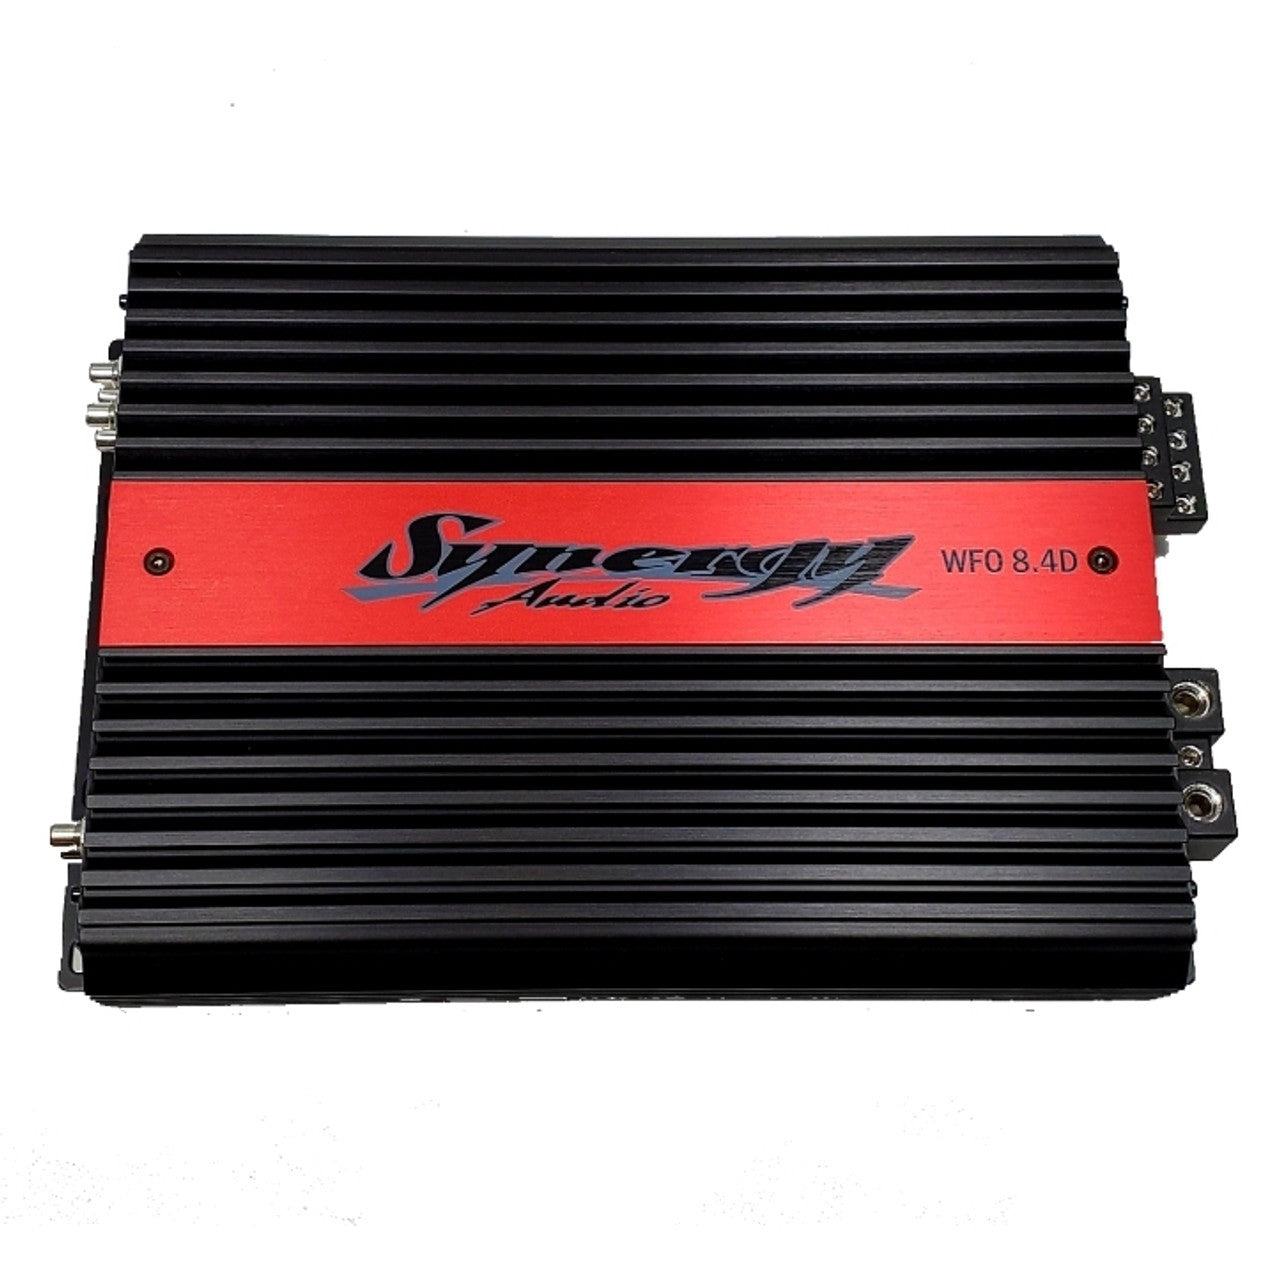 SYNERGY AUDIO WFO 8.4D 4 CHANNEL AMPLIFIER